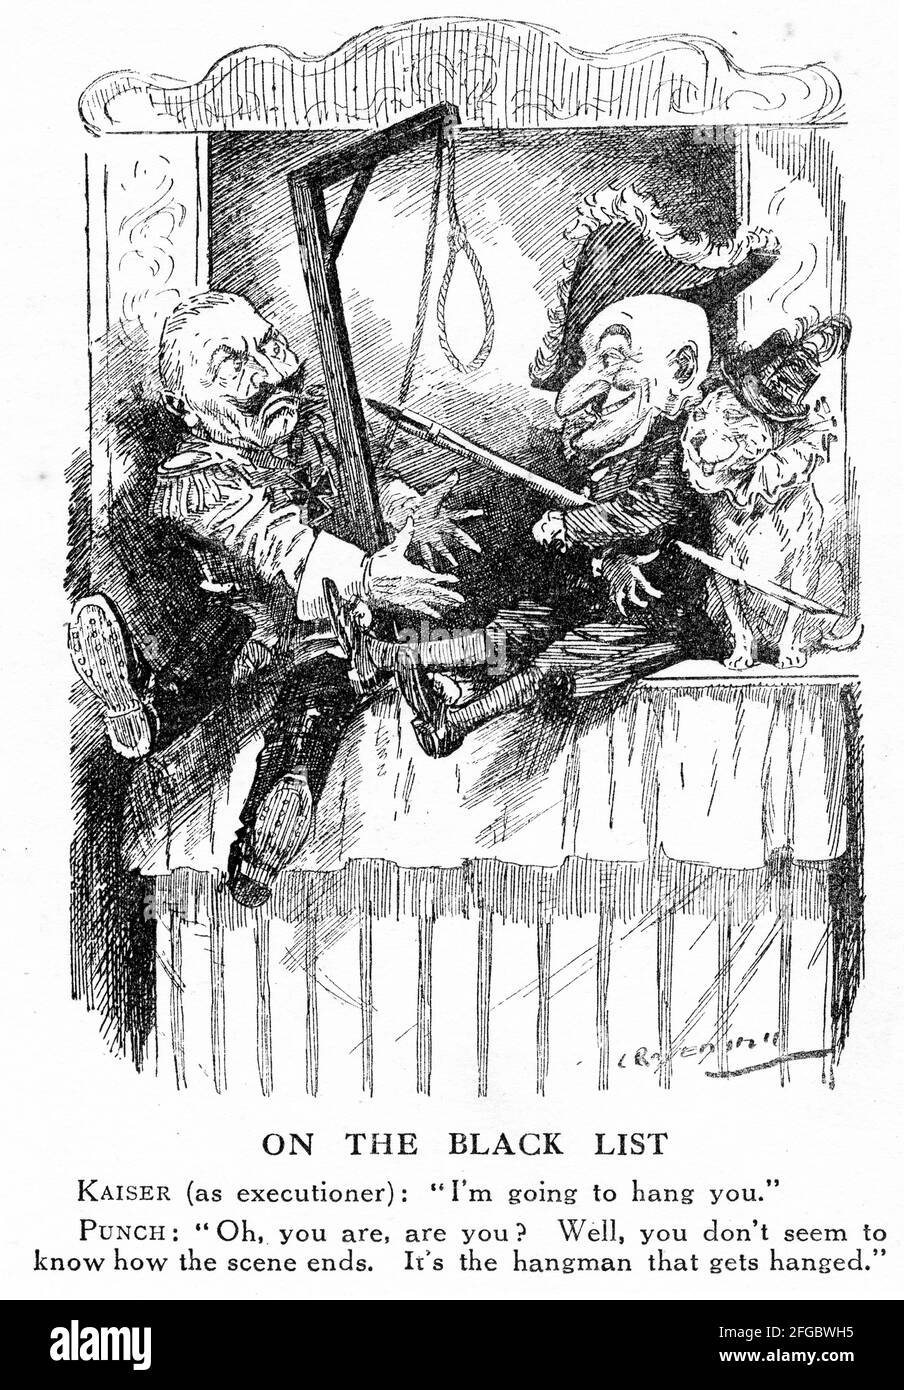 Engraving of Mr Punch taunting the German executioner during World War One. From Punch magazine. Stock Photo